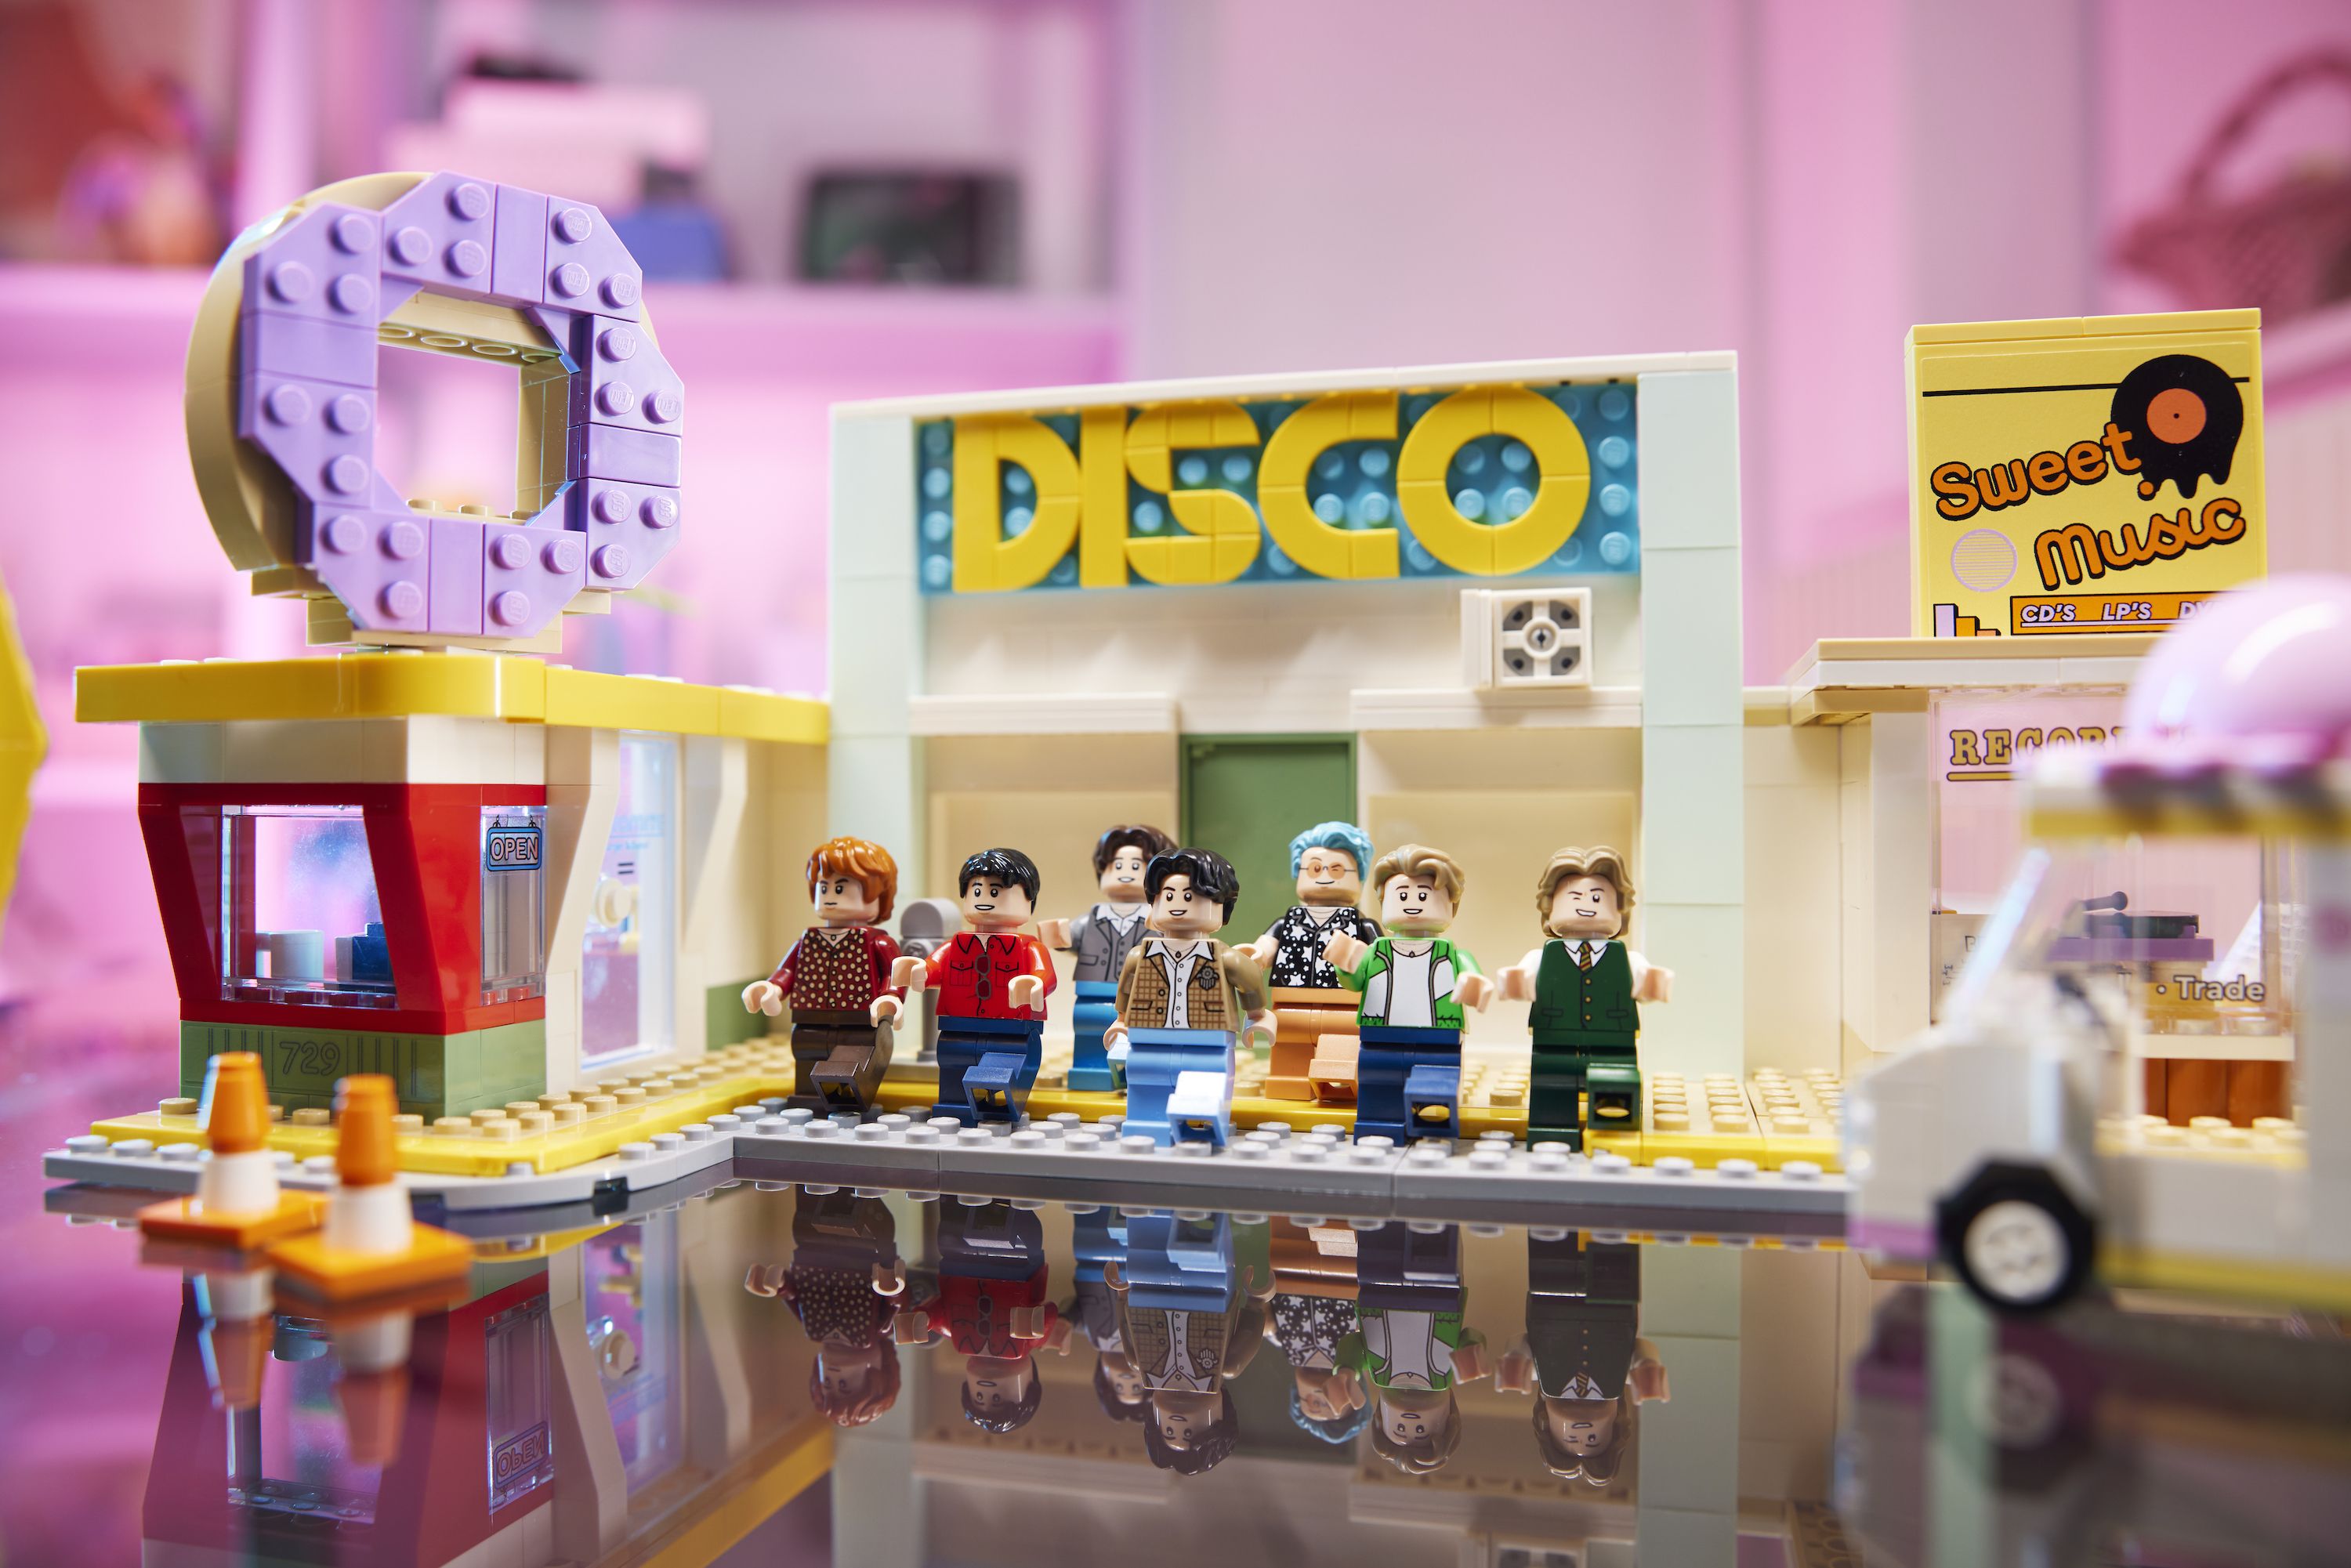 LEGO's BTS set goes on sale ahead of Black Friday and Cyber Monday